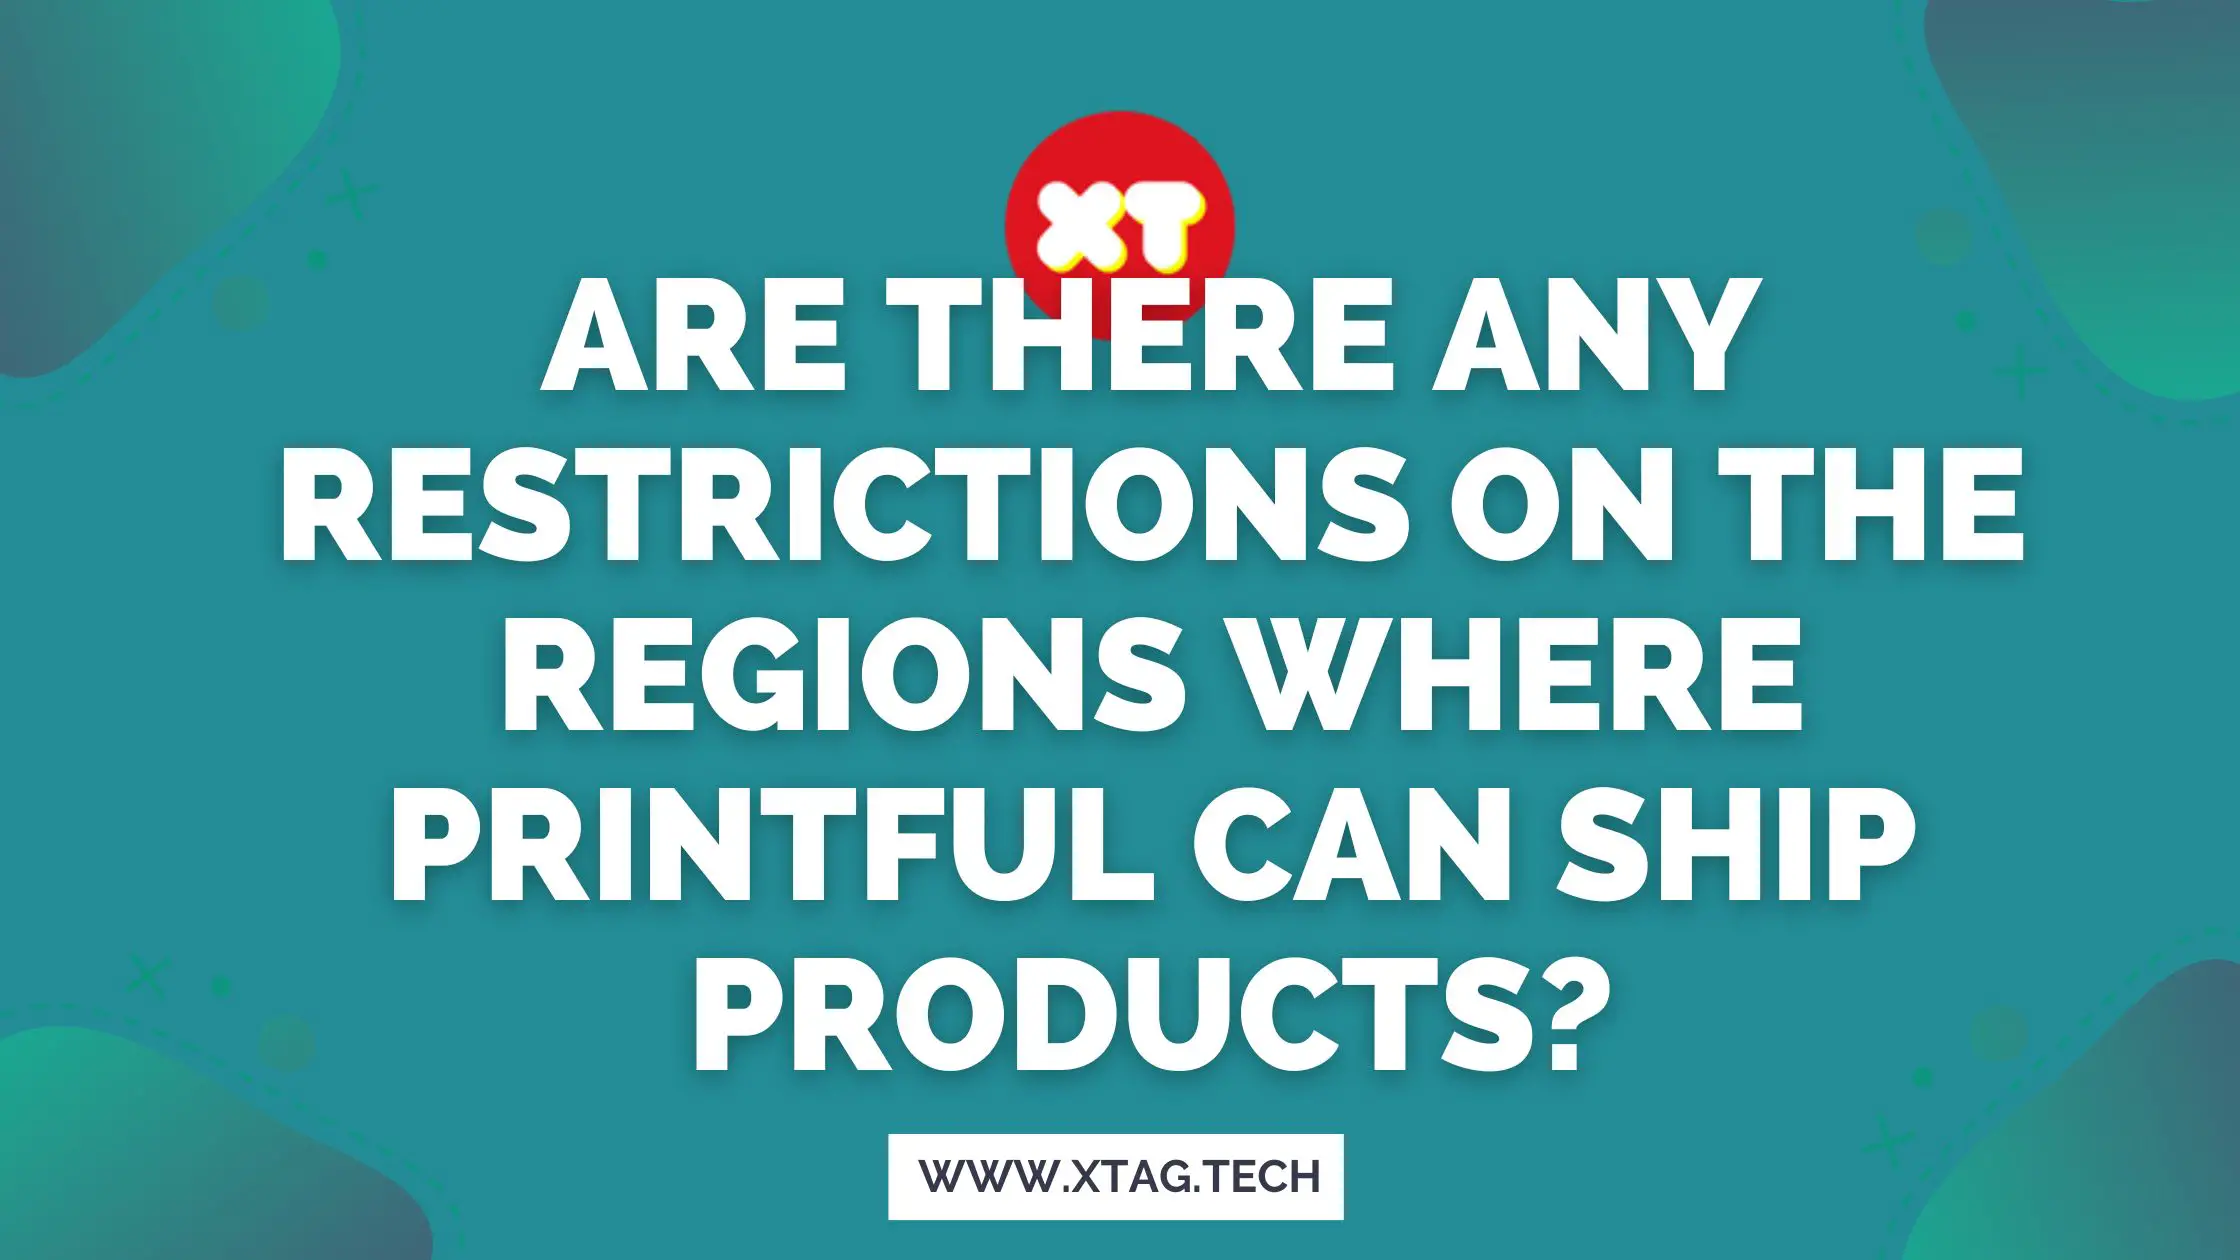 Are There Any Restrictions On The Regions Where Printful Can Ship Products?